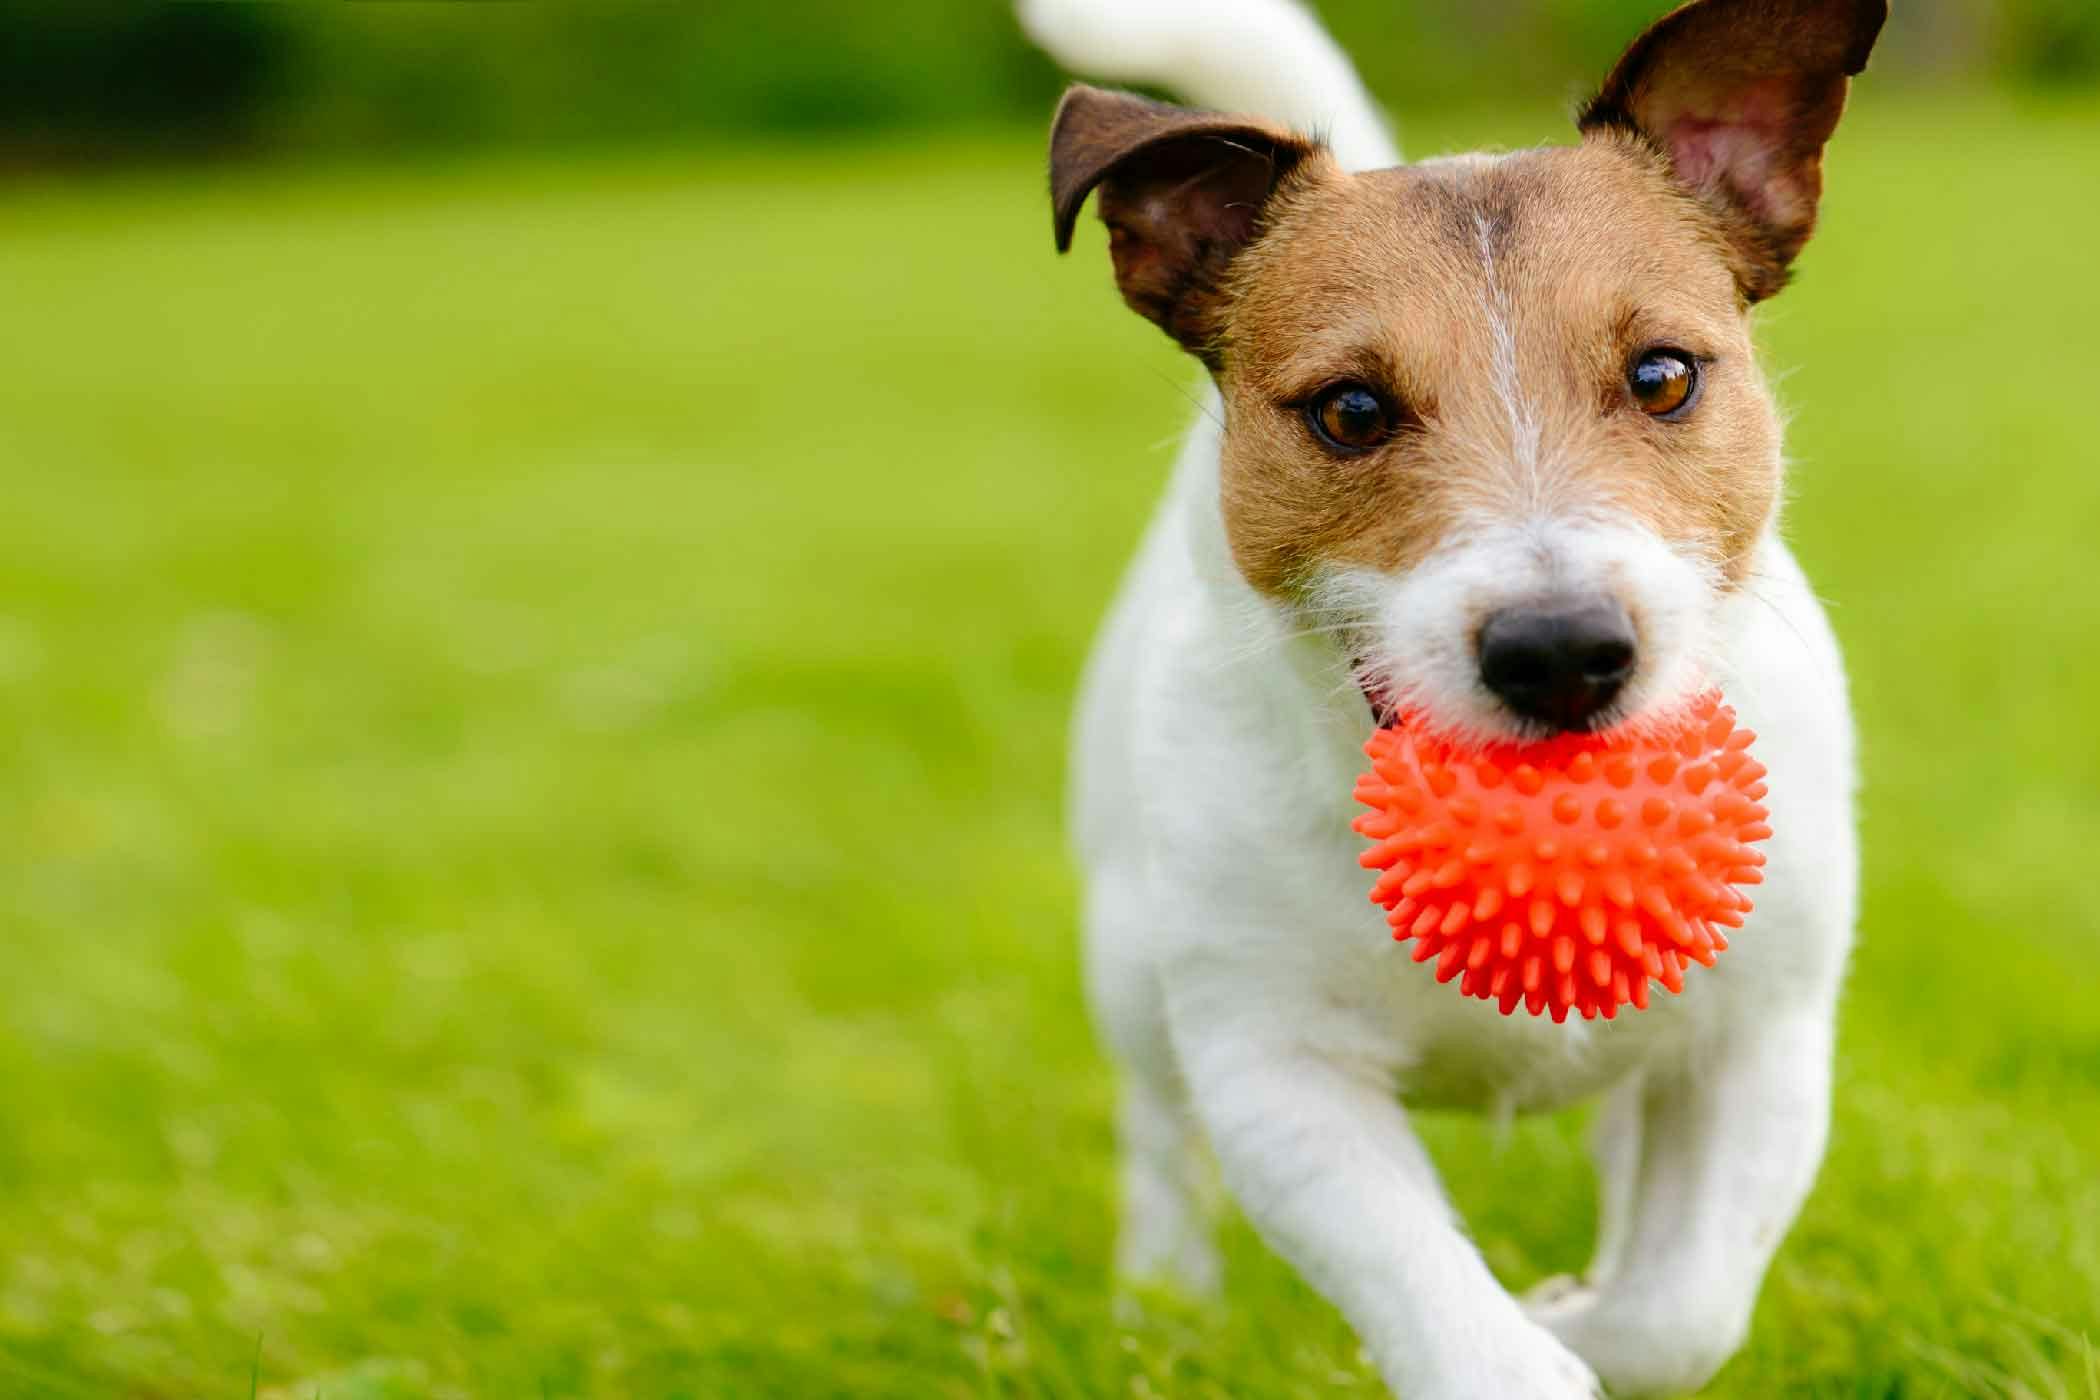 How to Train Your Dog to Force Fetch | Wag!